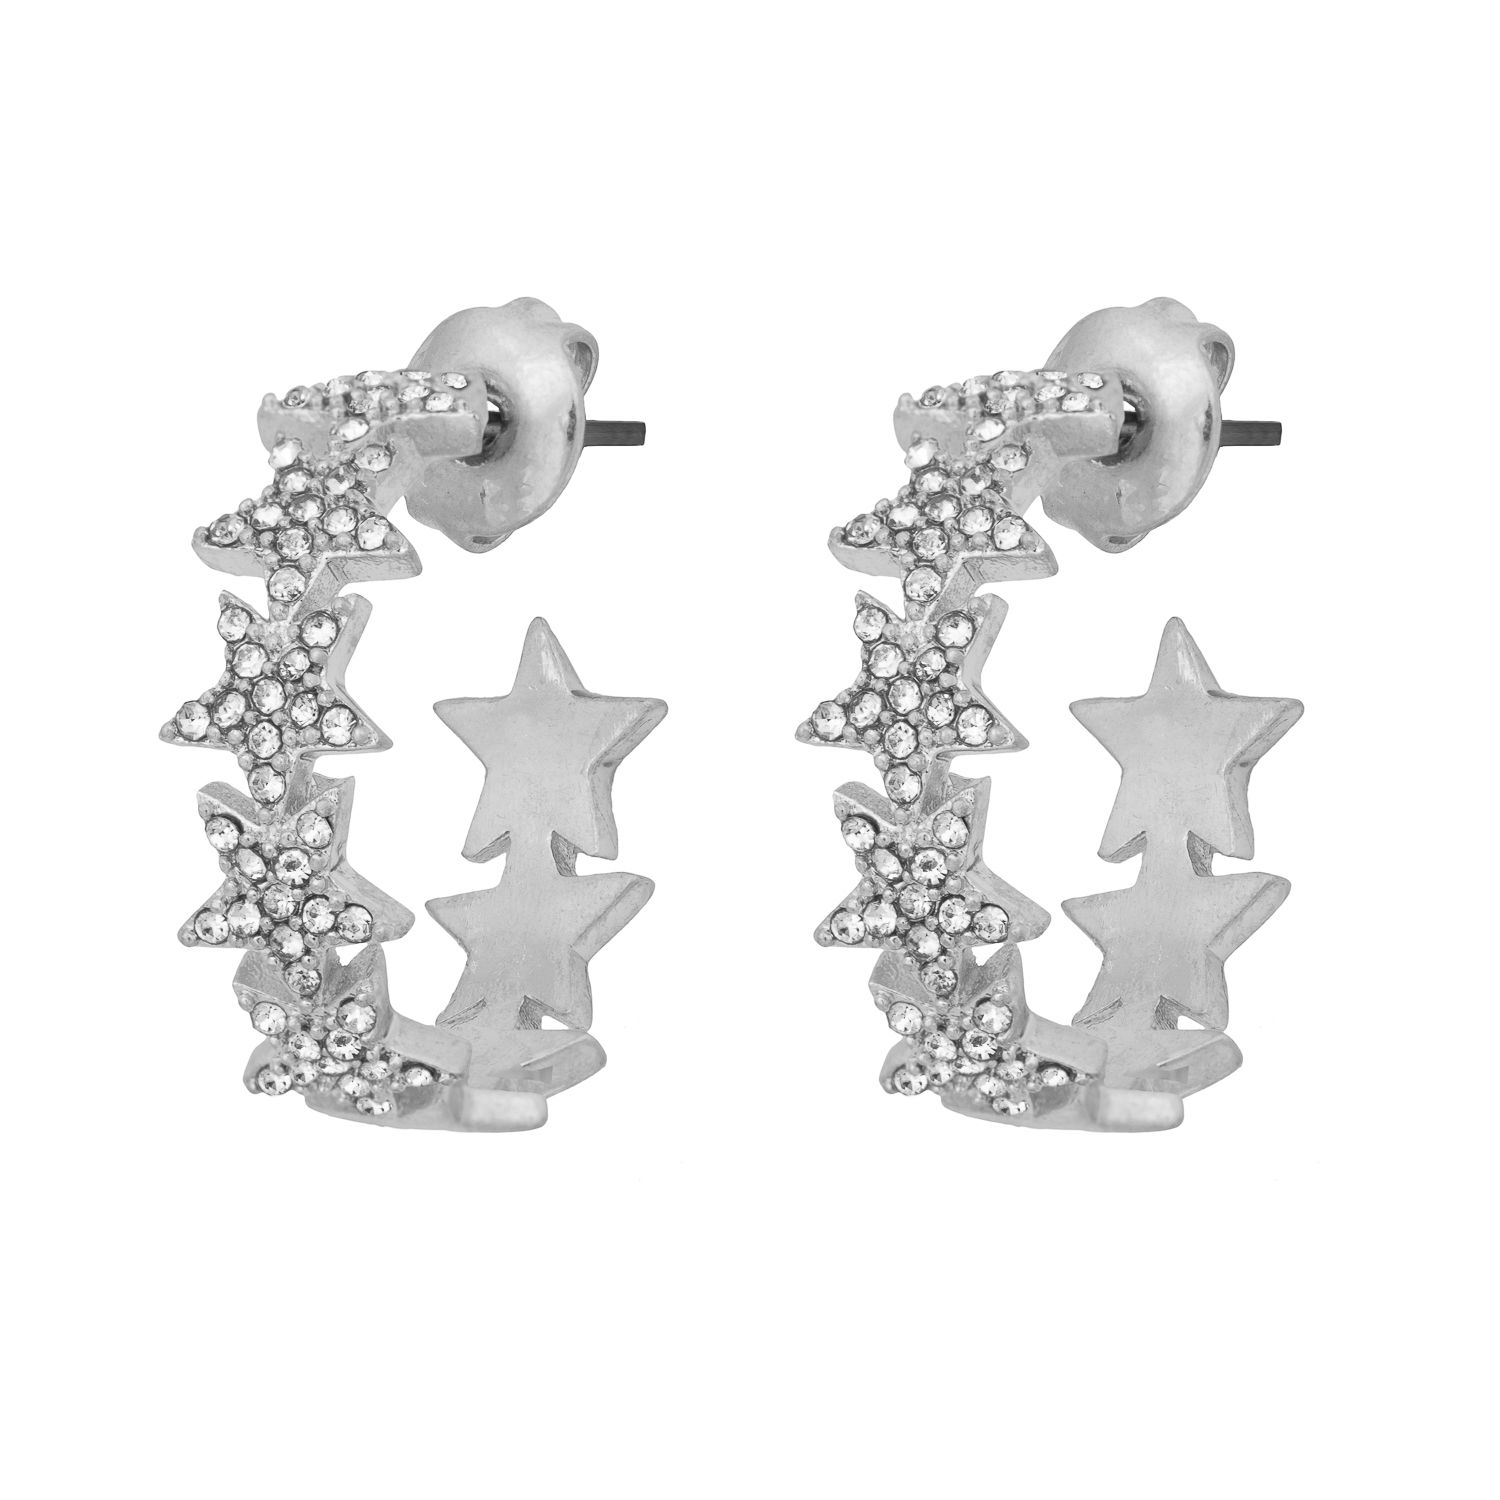 Unleash the twinkling star in you attracting attention with a subtle, yet sparkling style that can't be missed. Dazzle into the new season with these silver plated sparkly star earrings that are perfect for everyday wear for any occasion! The delicate silver tone earrings feature beautiful pave stars with a depth of 20mm. Presented in a KTx jewellery pouch to keep your jewellery safe or ideal for gifting!